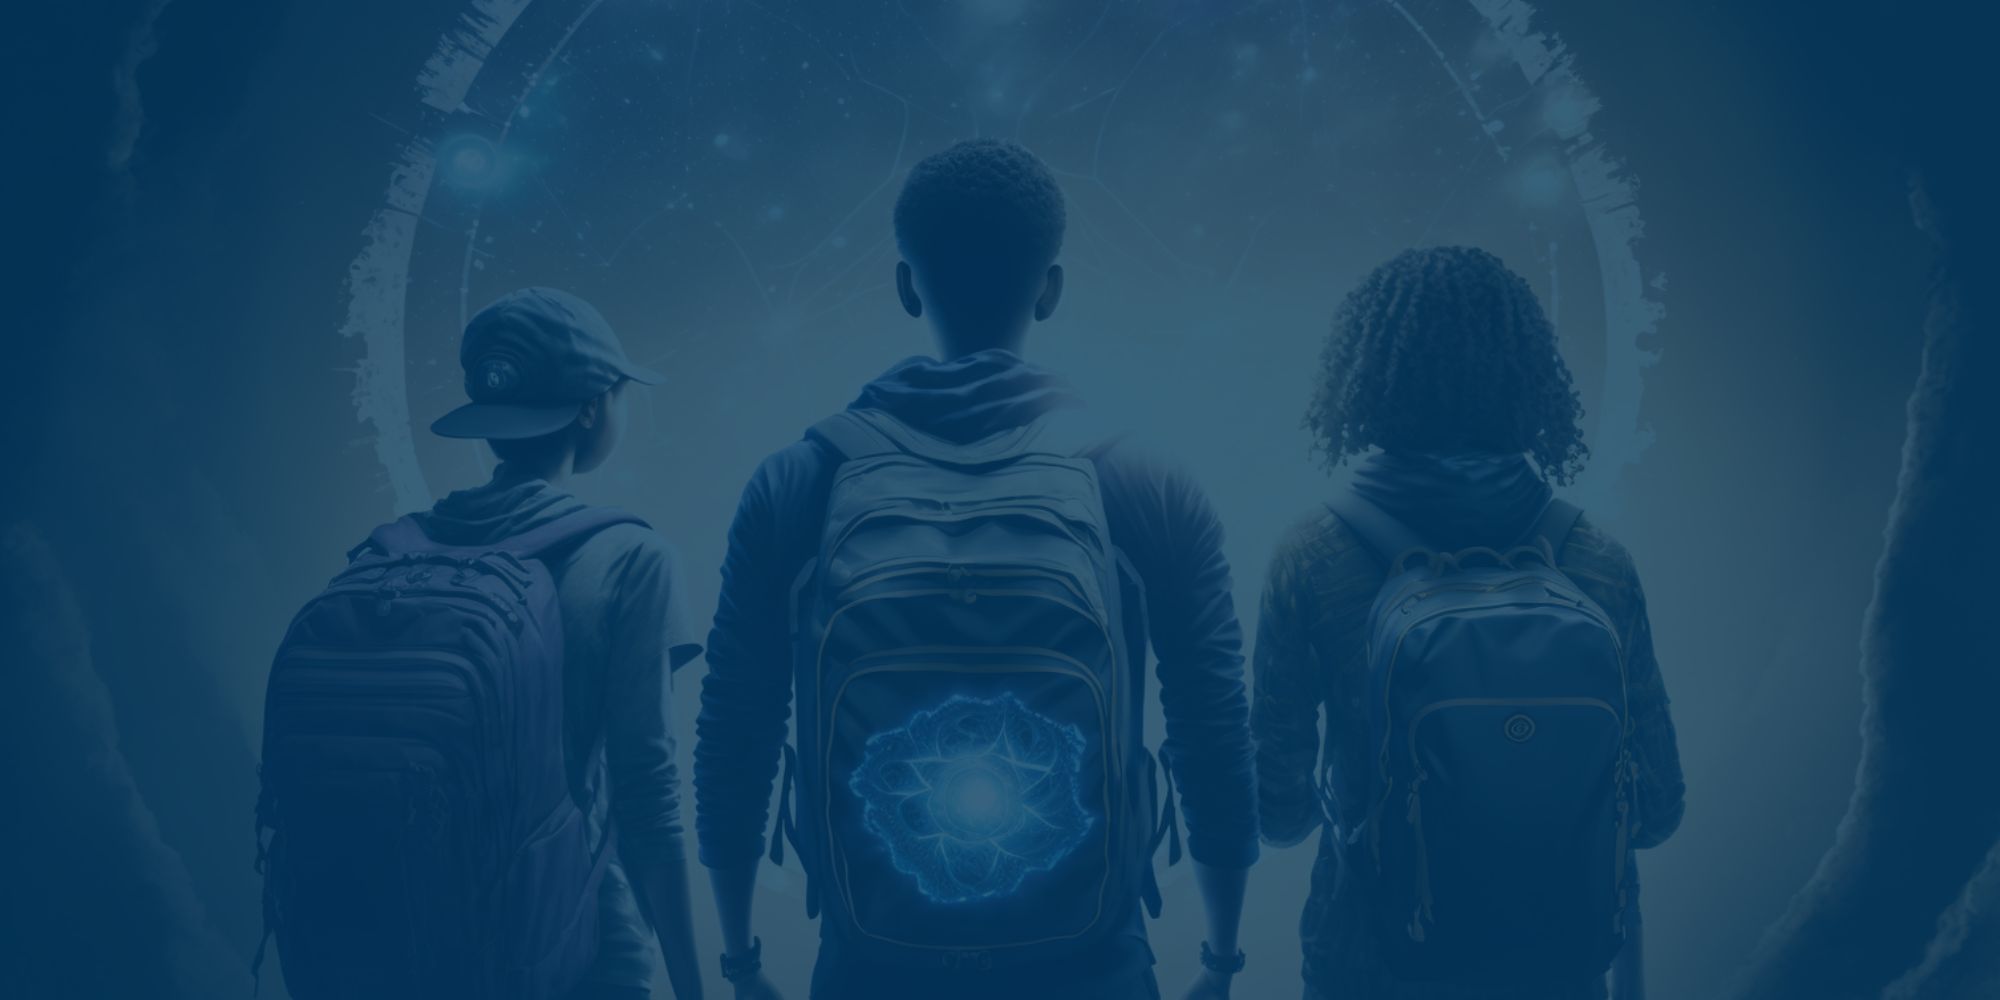 7 Reasons Why Your School Should Be Prepping for the Metaverse